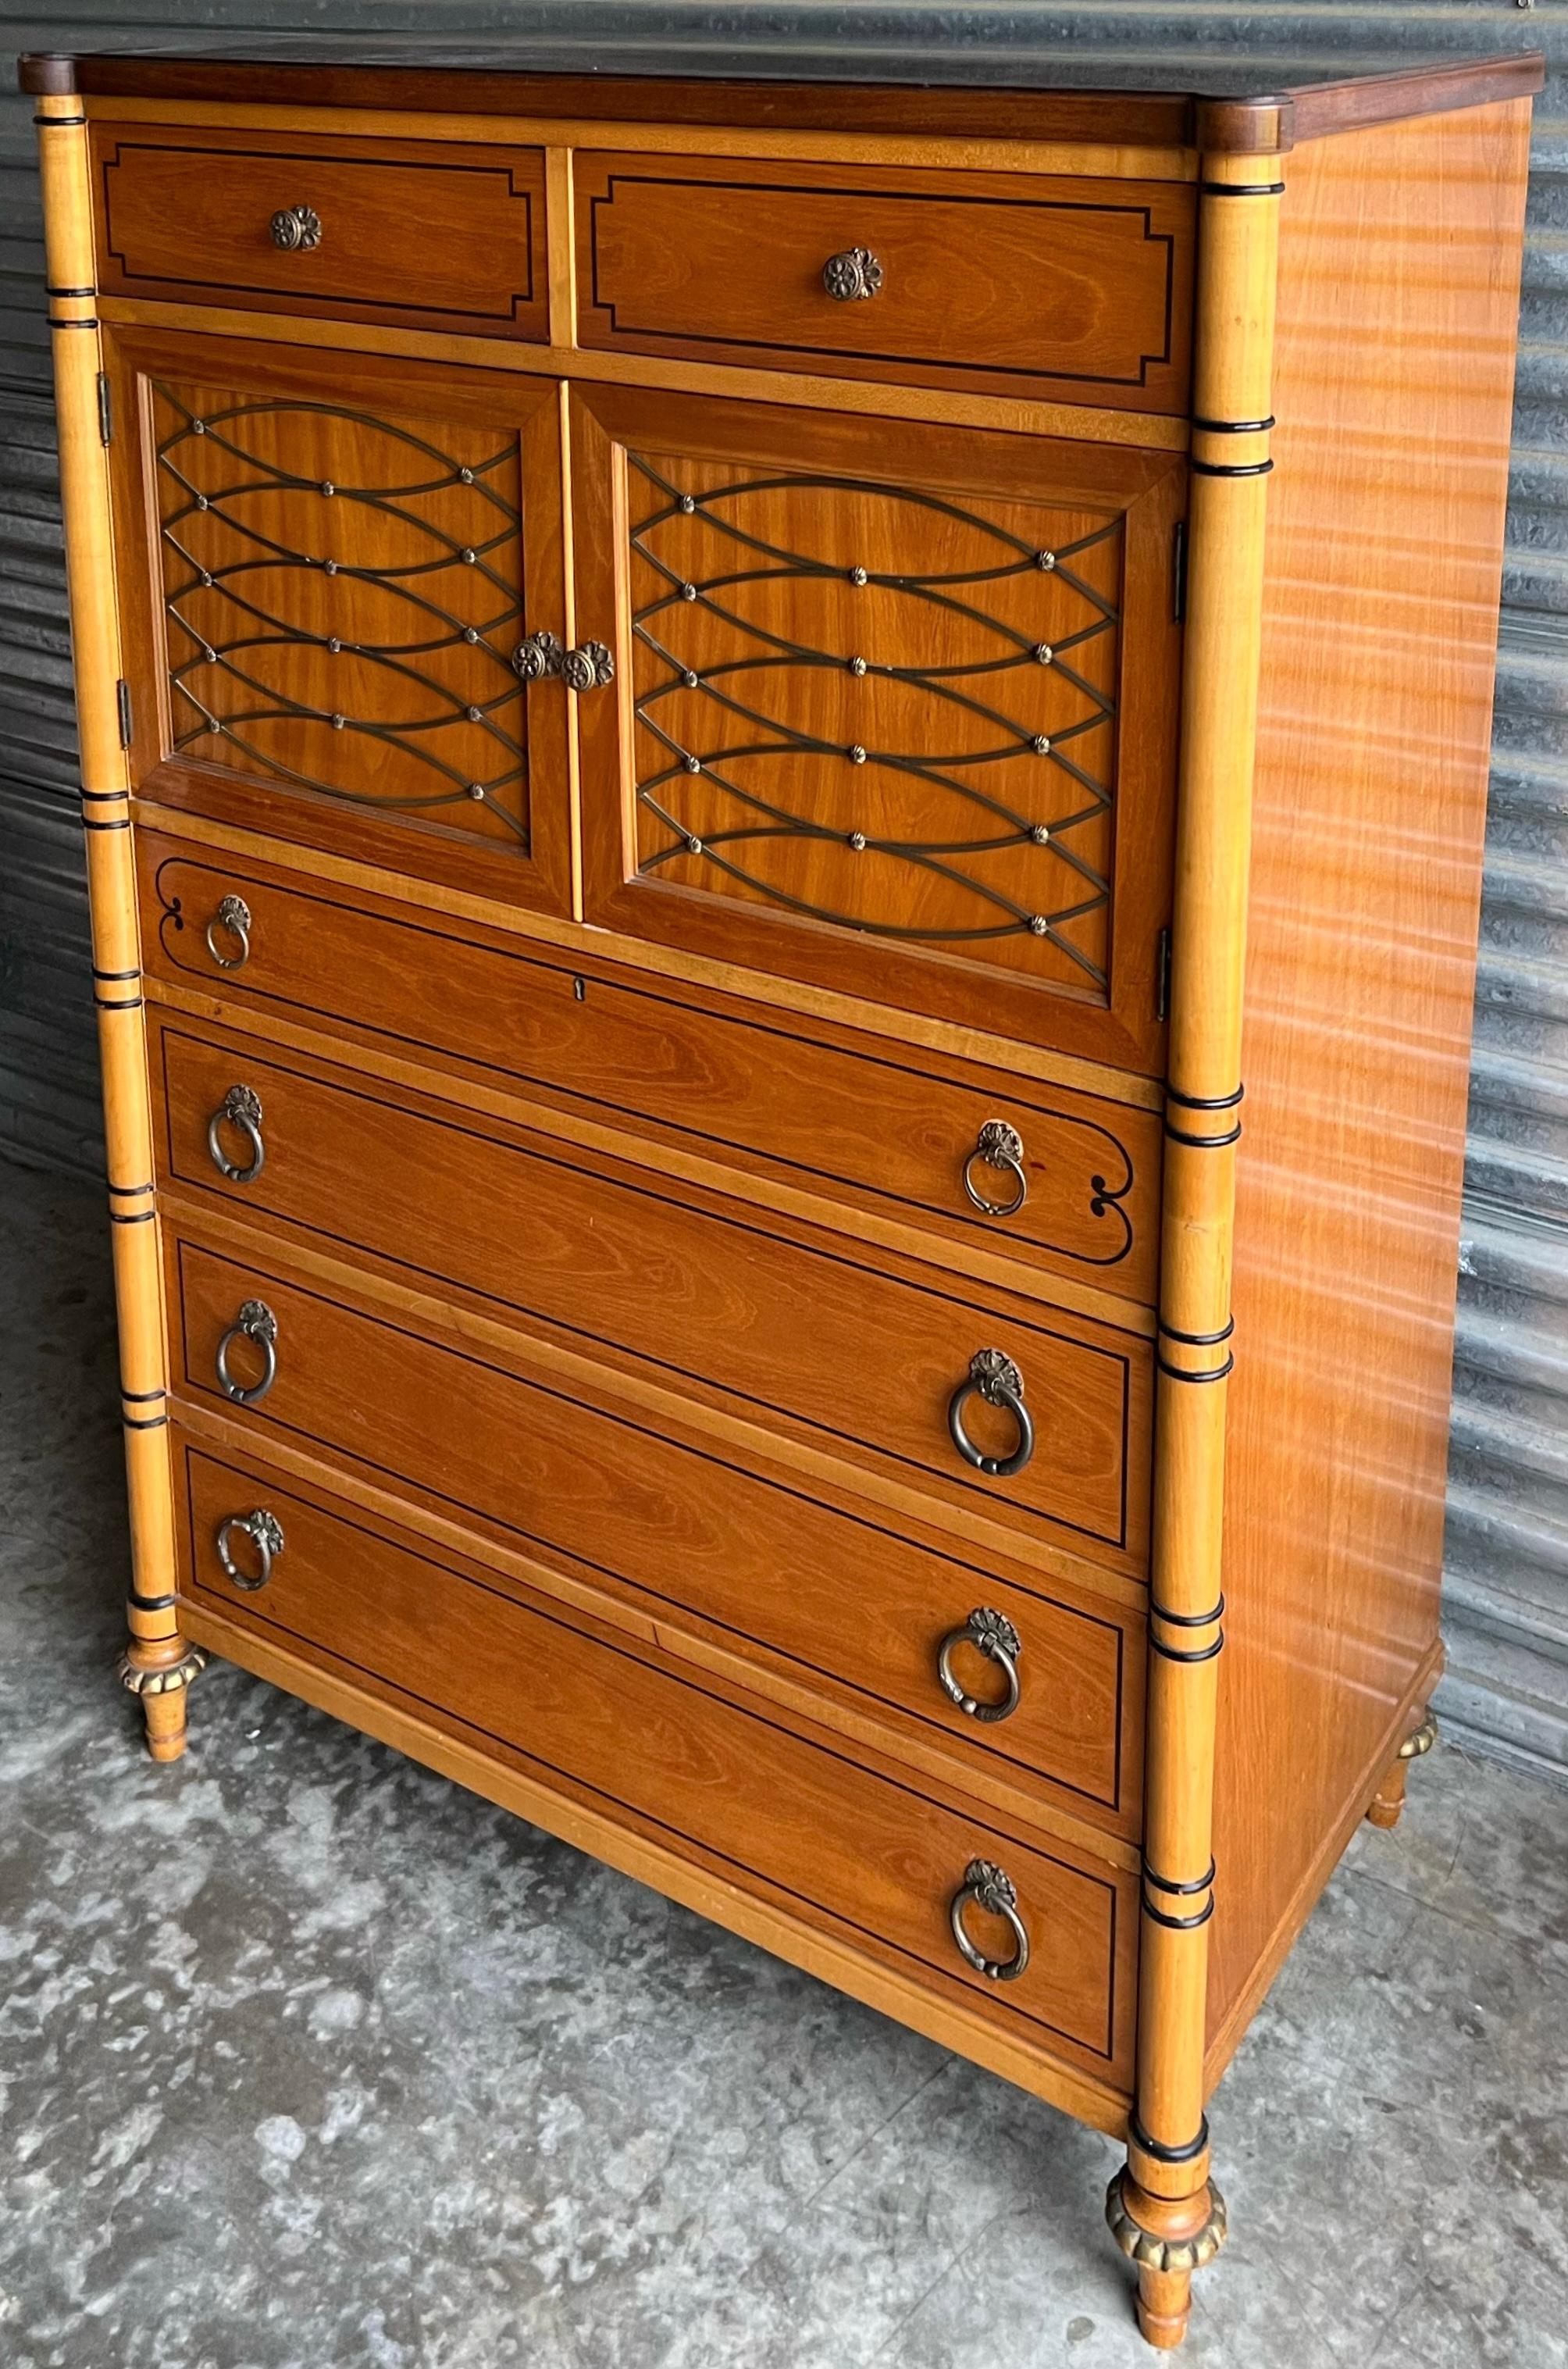 Hollywood Regency 1940s French Regency Style Faux Bamboo Inspired Tall Maple Chest of Drawers For Sale